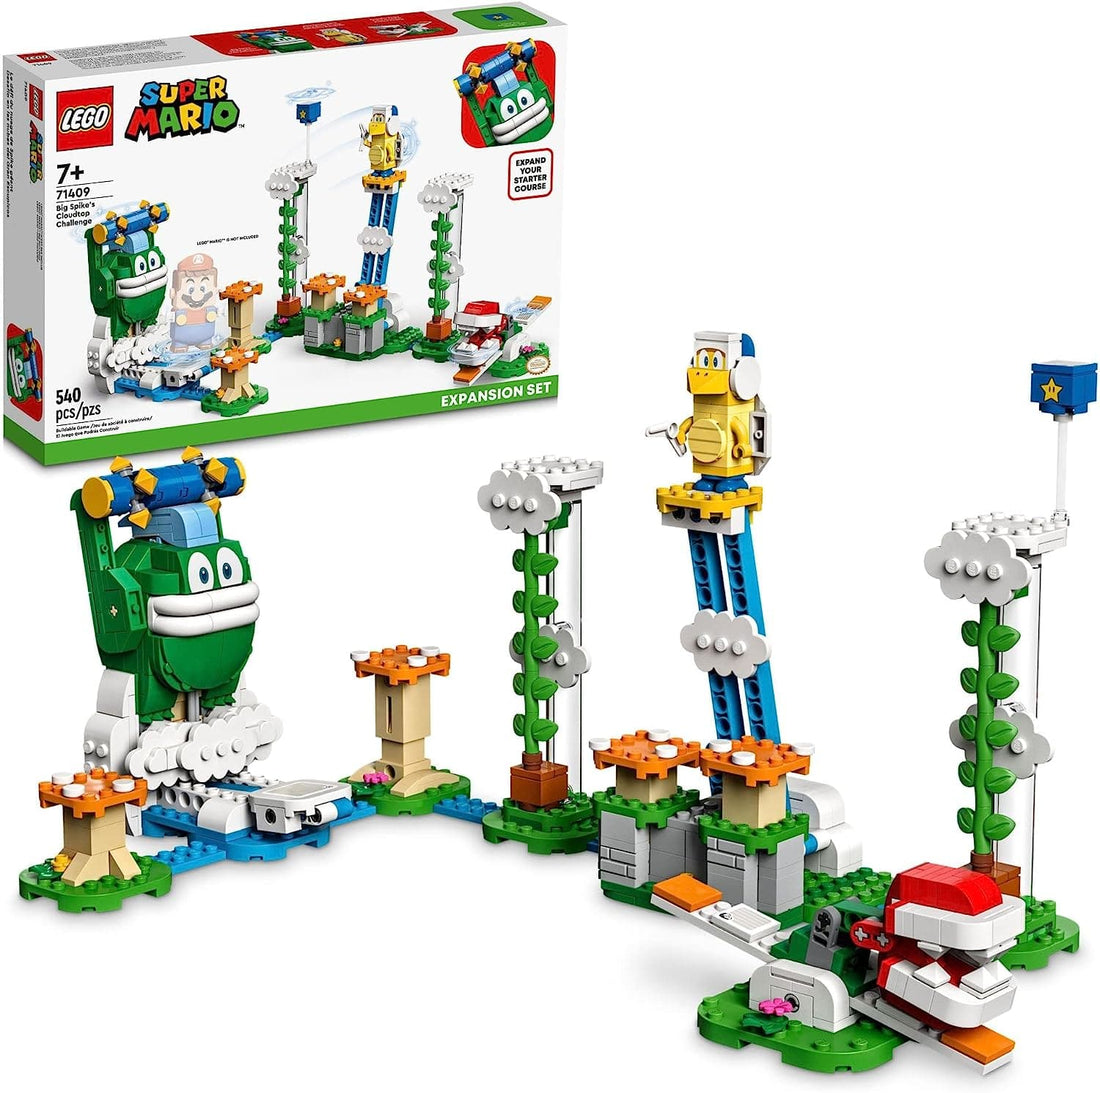 LEGO Super Mario Big Spike’s Cloudtop Challenge Expansion Set with 3 Figures Including Boomerang Bro and Piranha Plant - best price from Maltashopper.com 71409